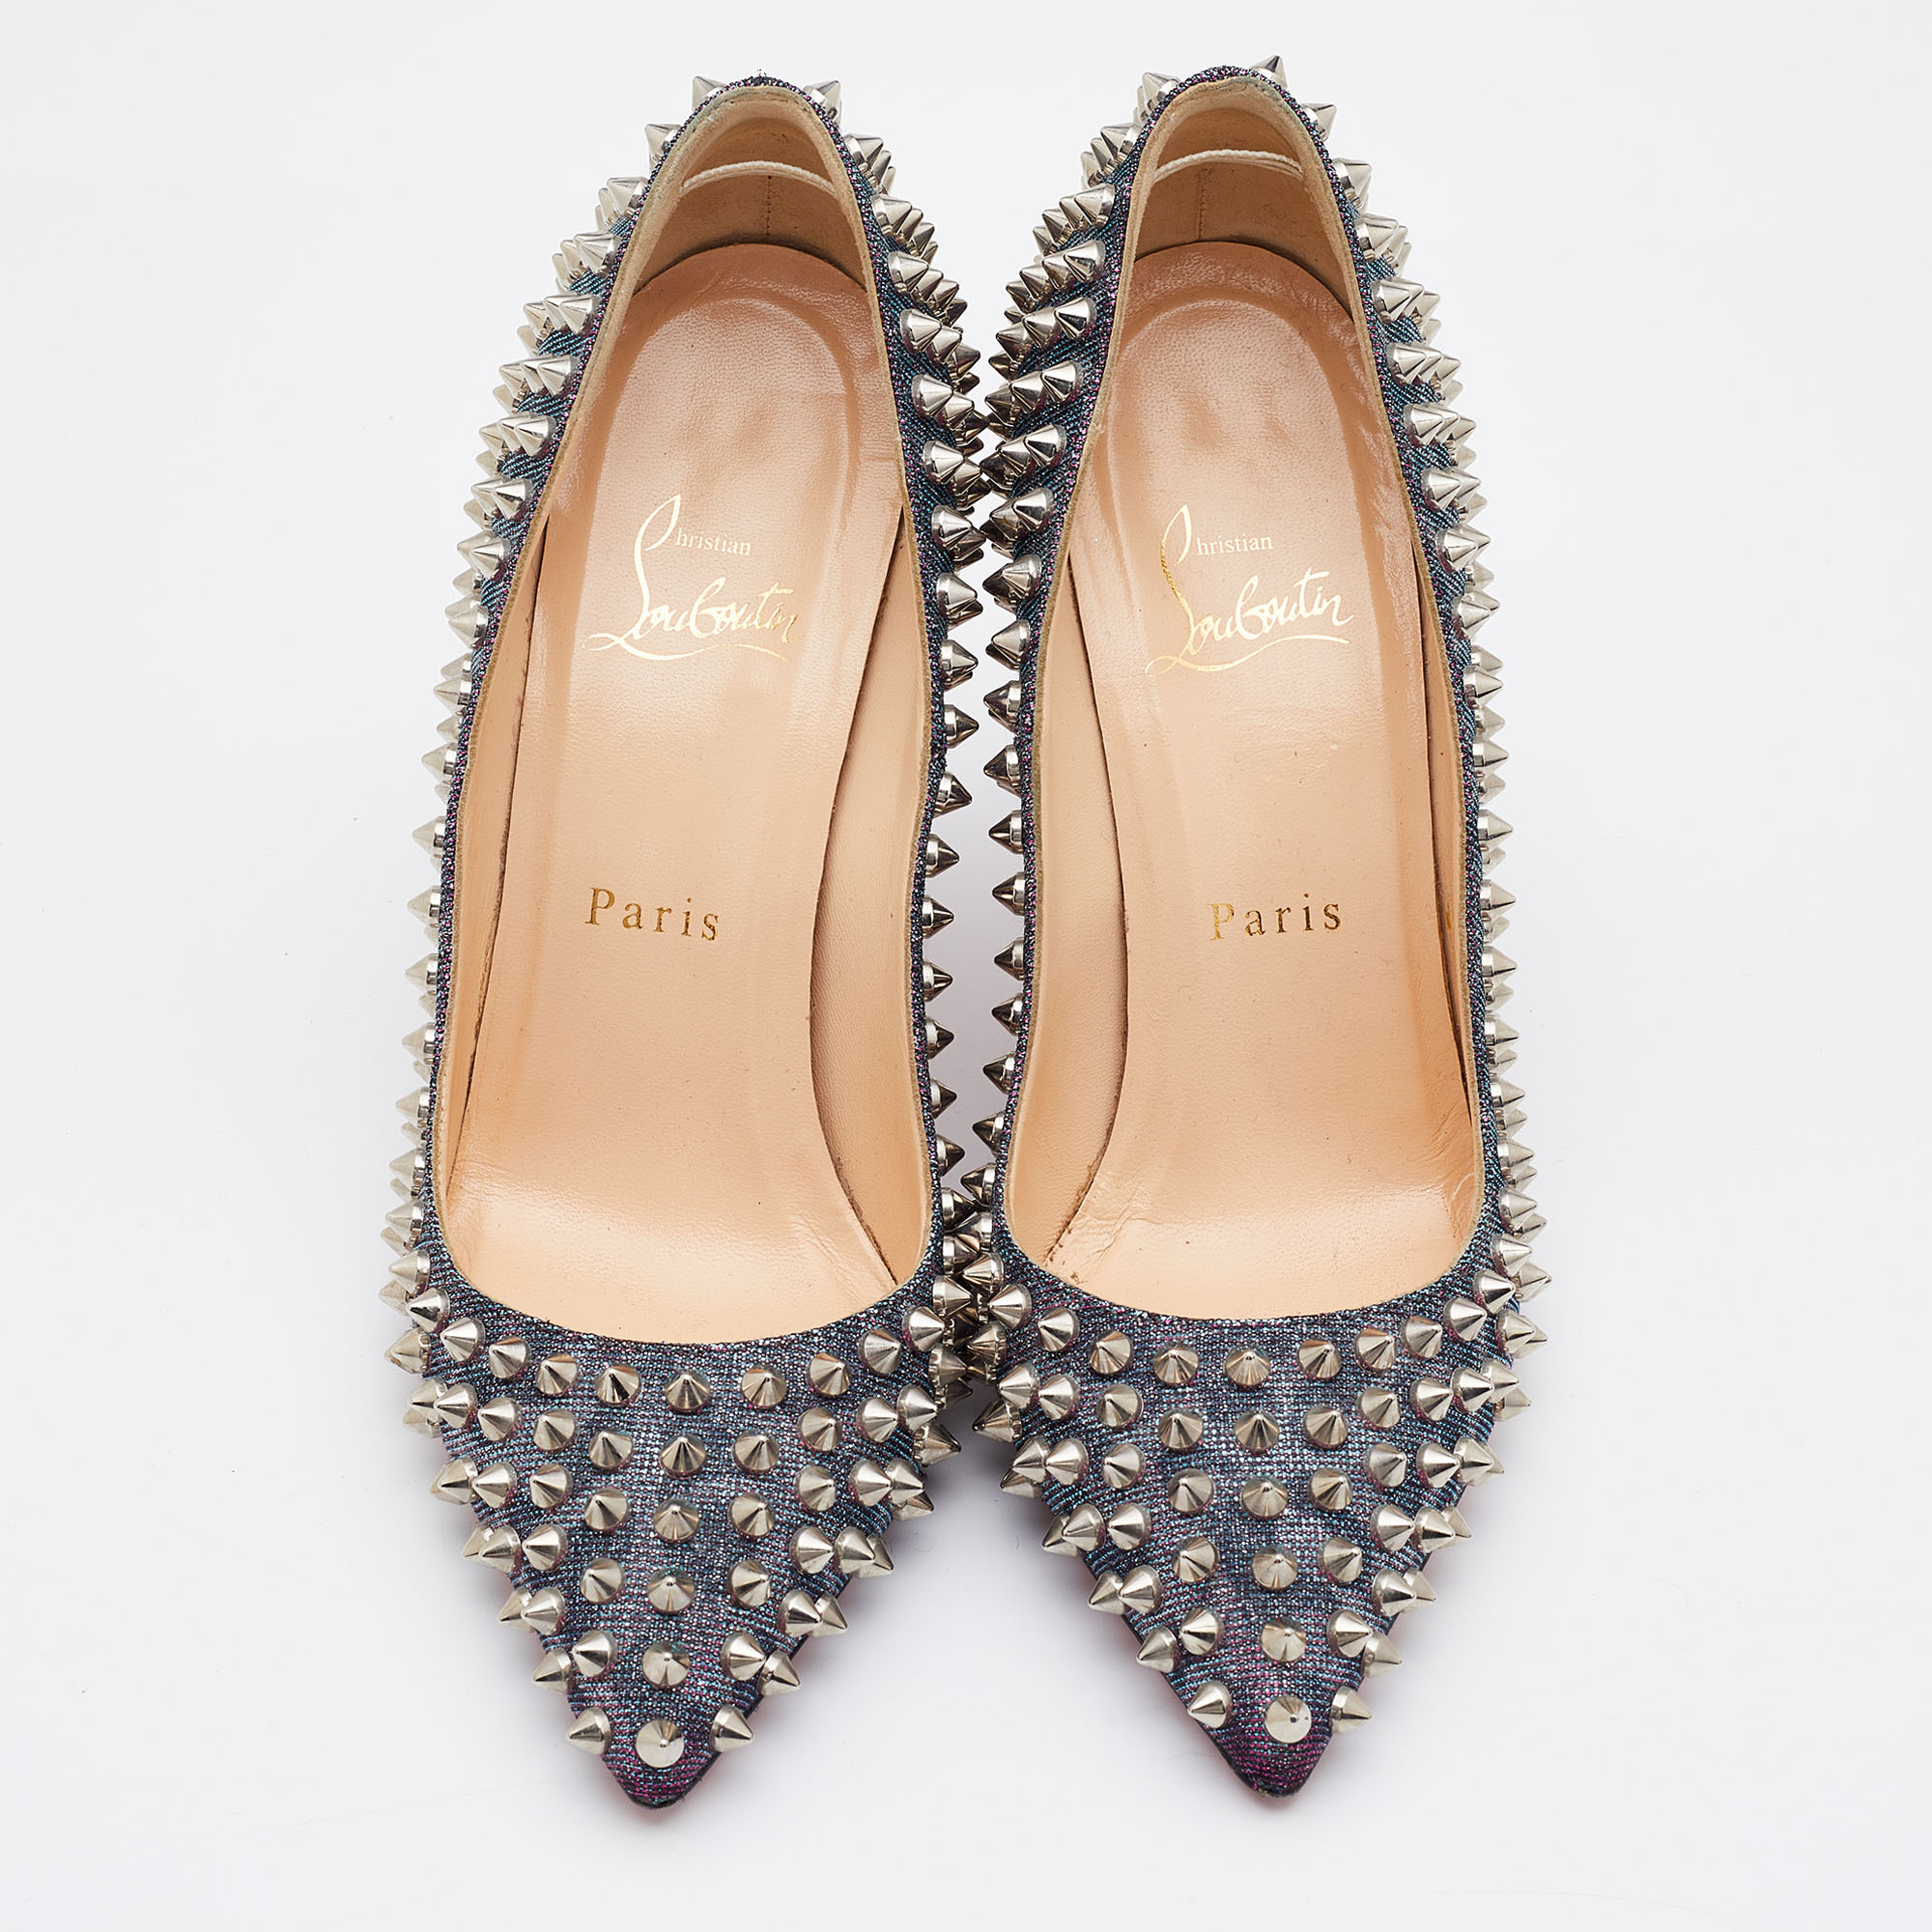 Christian Louboutin Multicolor Holographic Lurex Fabric Pigalle Spikes Pumps Size 37